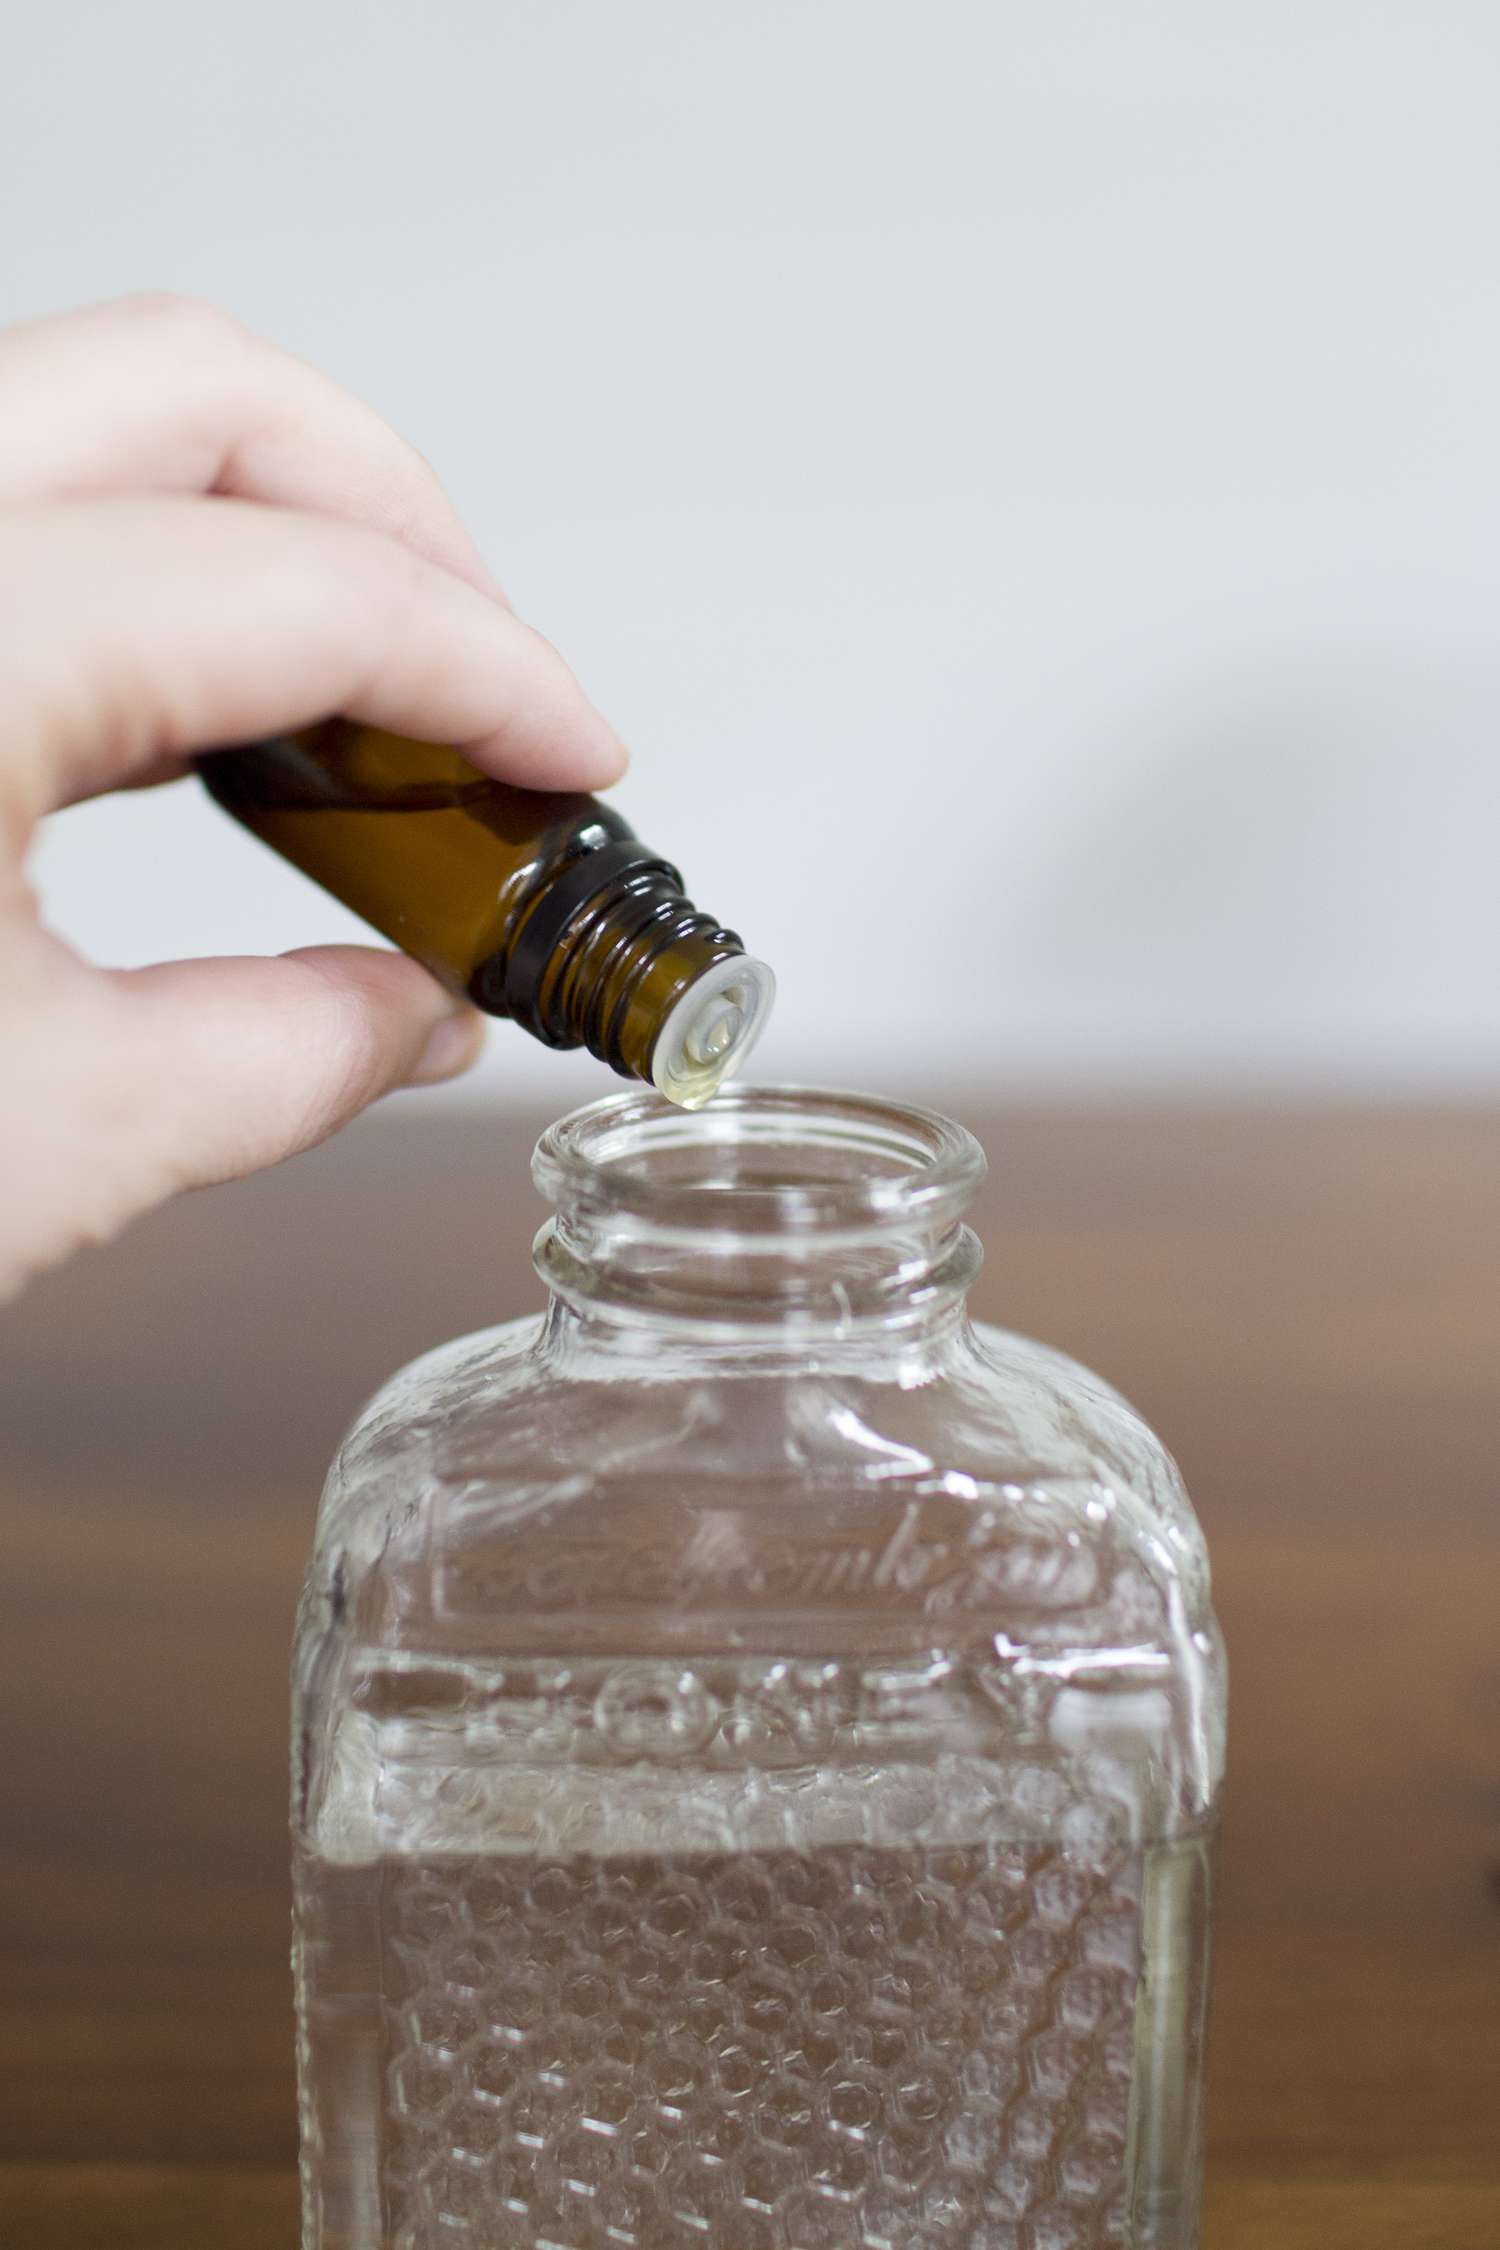 Adding essential oils to the diffuser bottle.